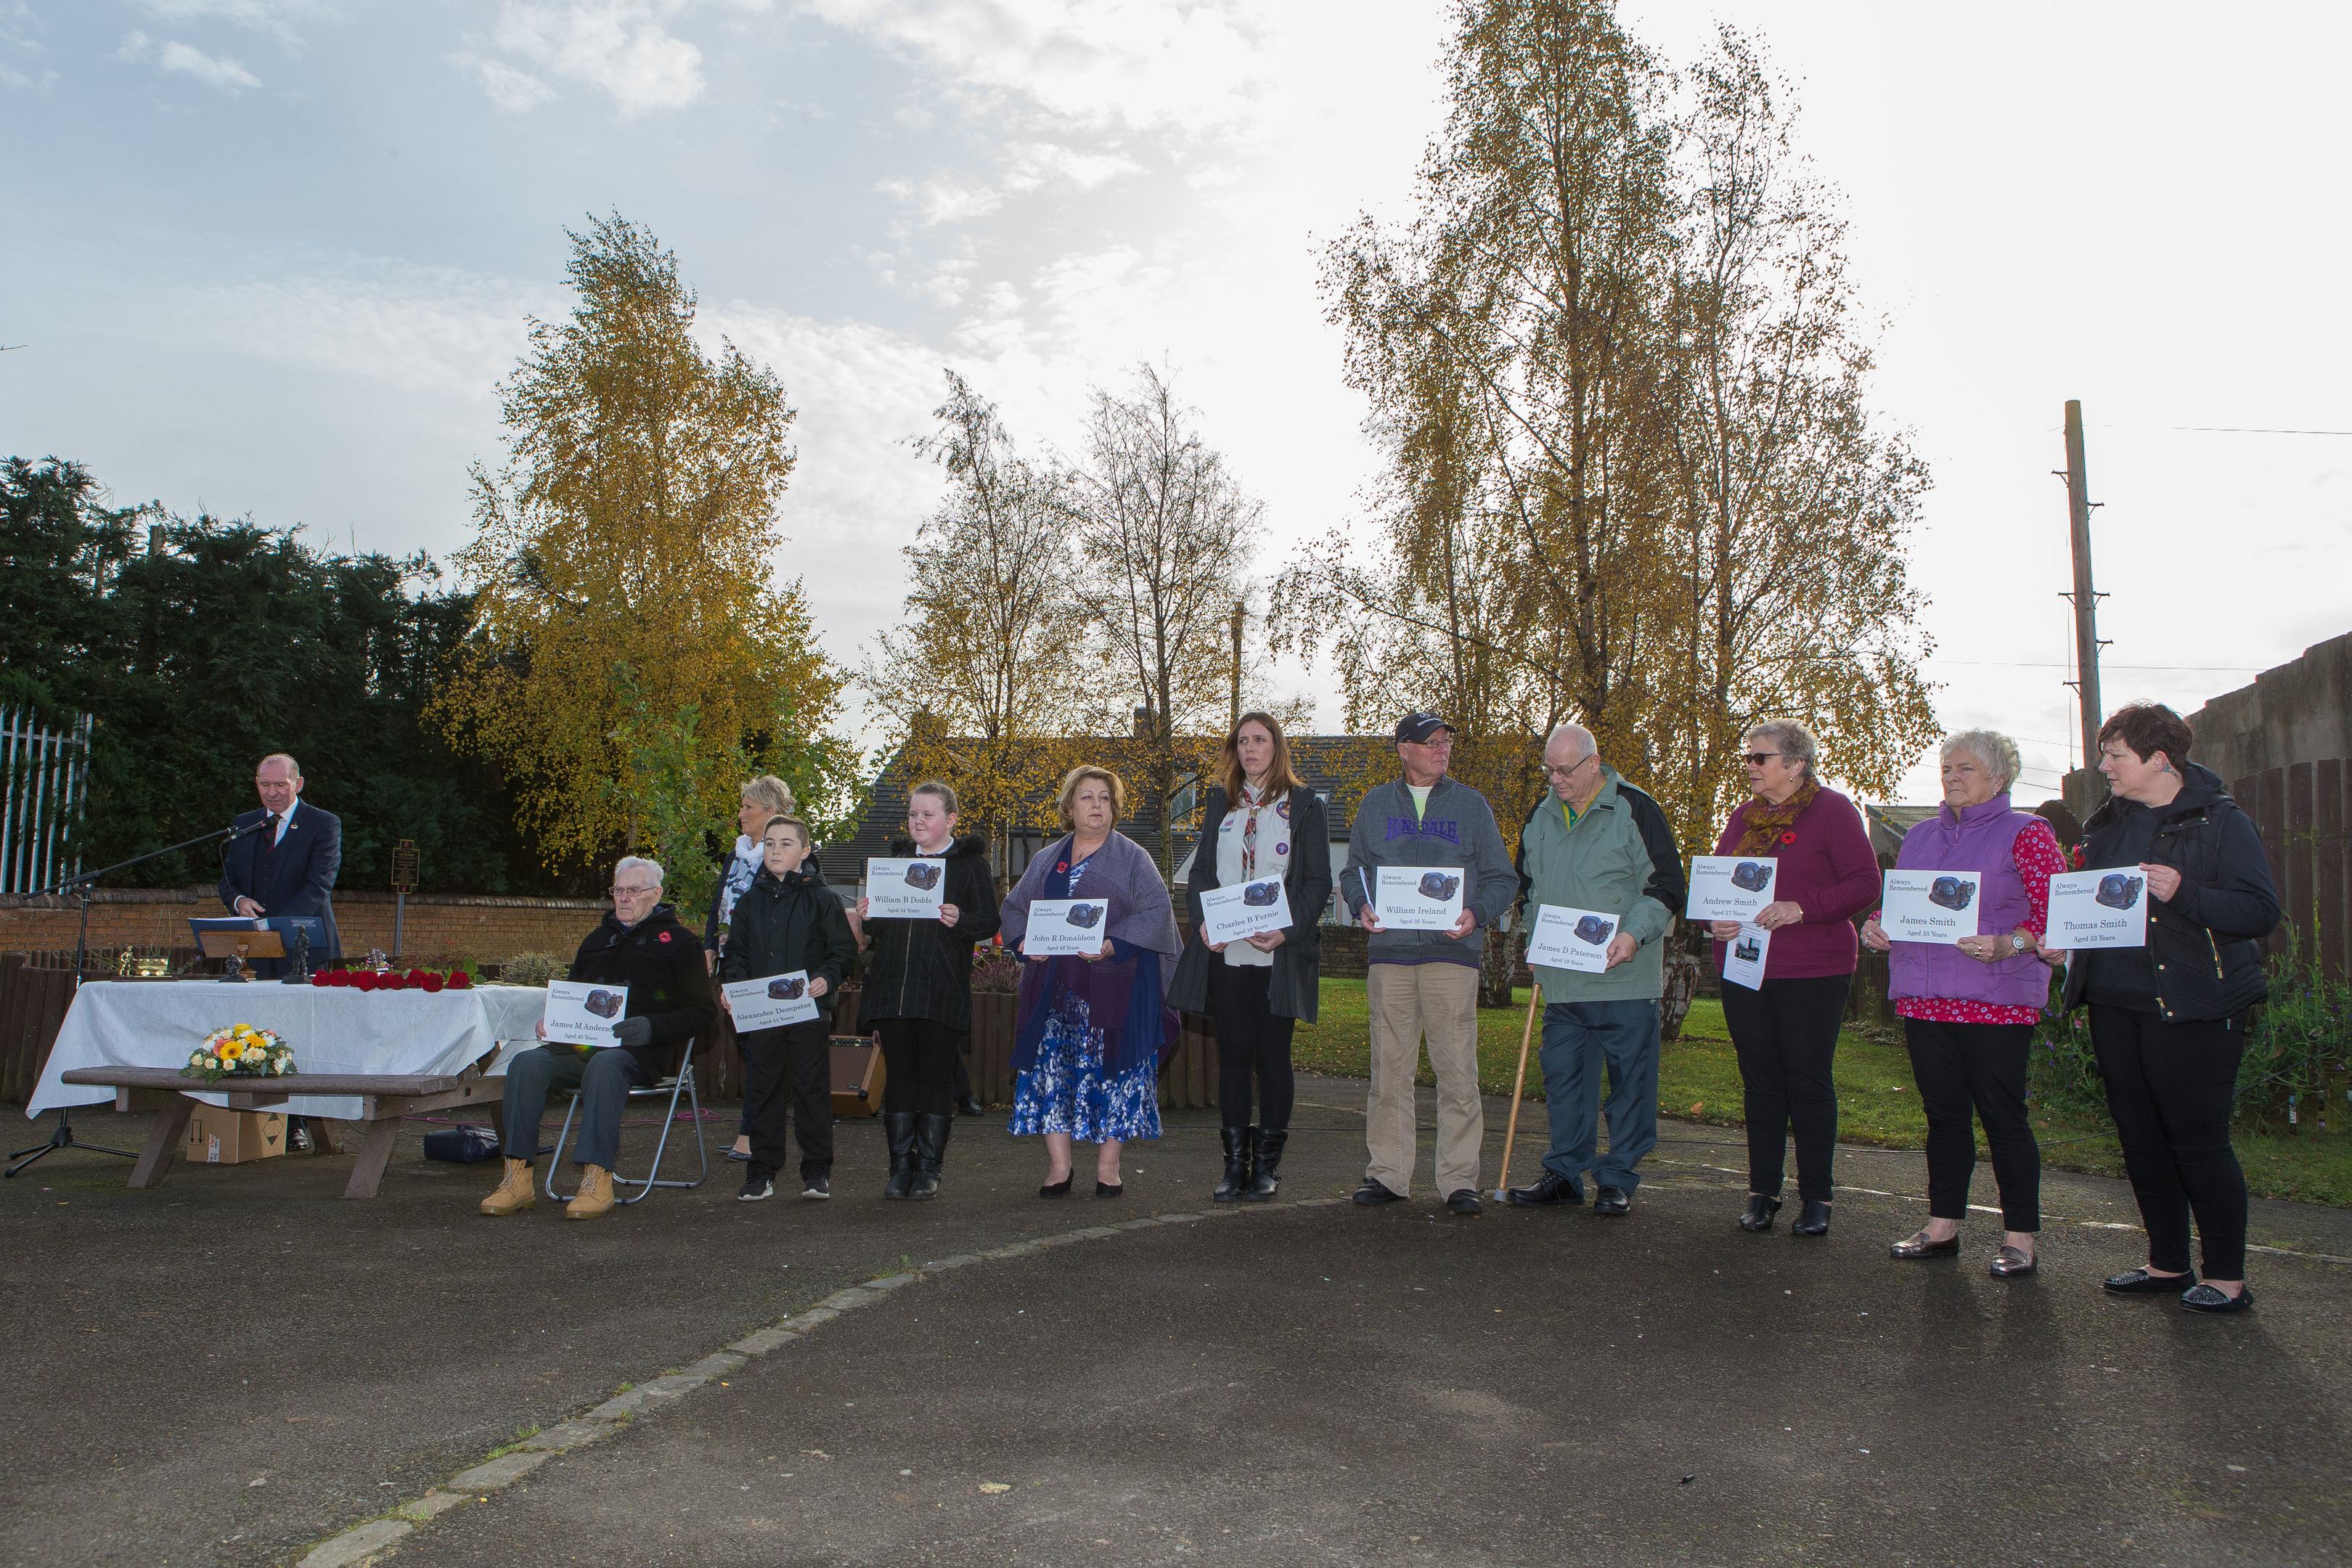 The memorial service in Bowhill Community Garden led by John Gilfillan and attended by locals. Members of the public held plaques with the names of the dead miners on them.